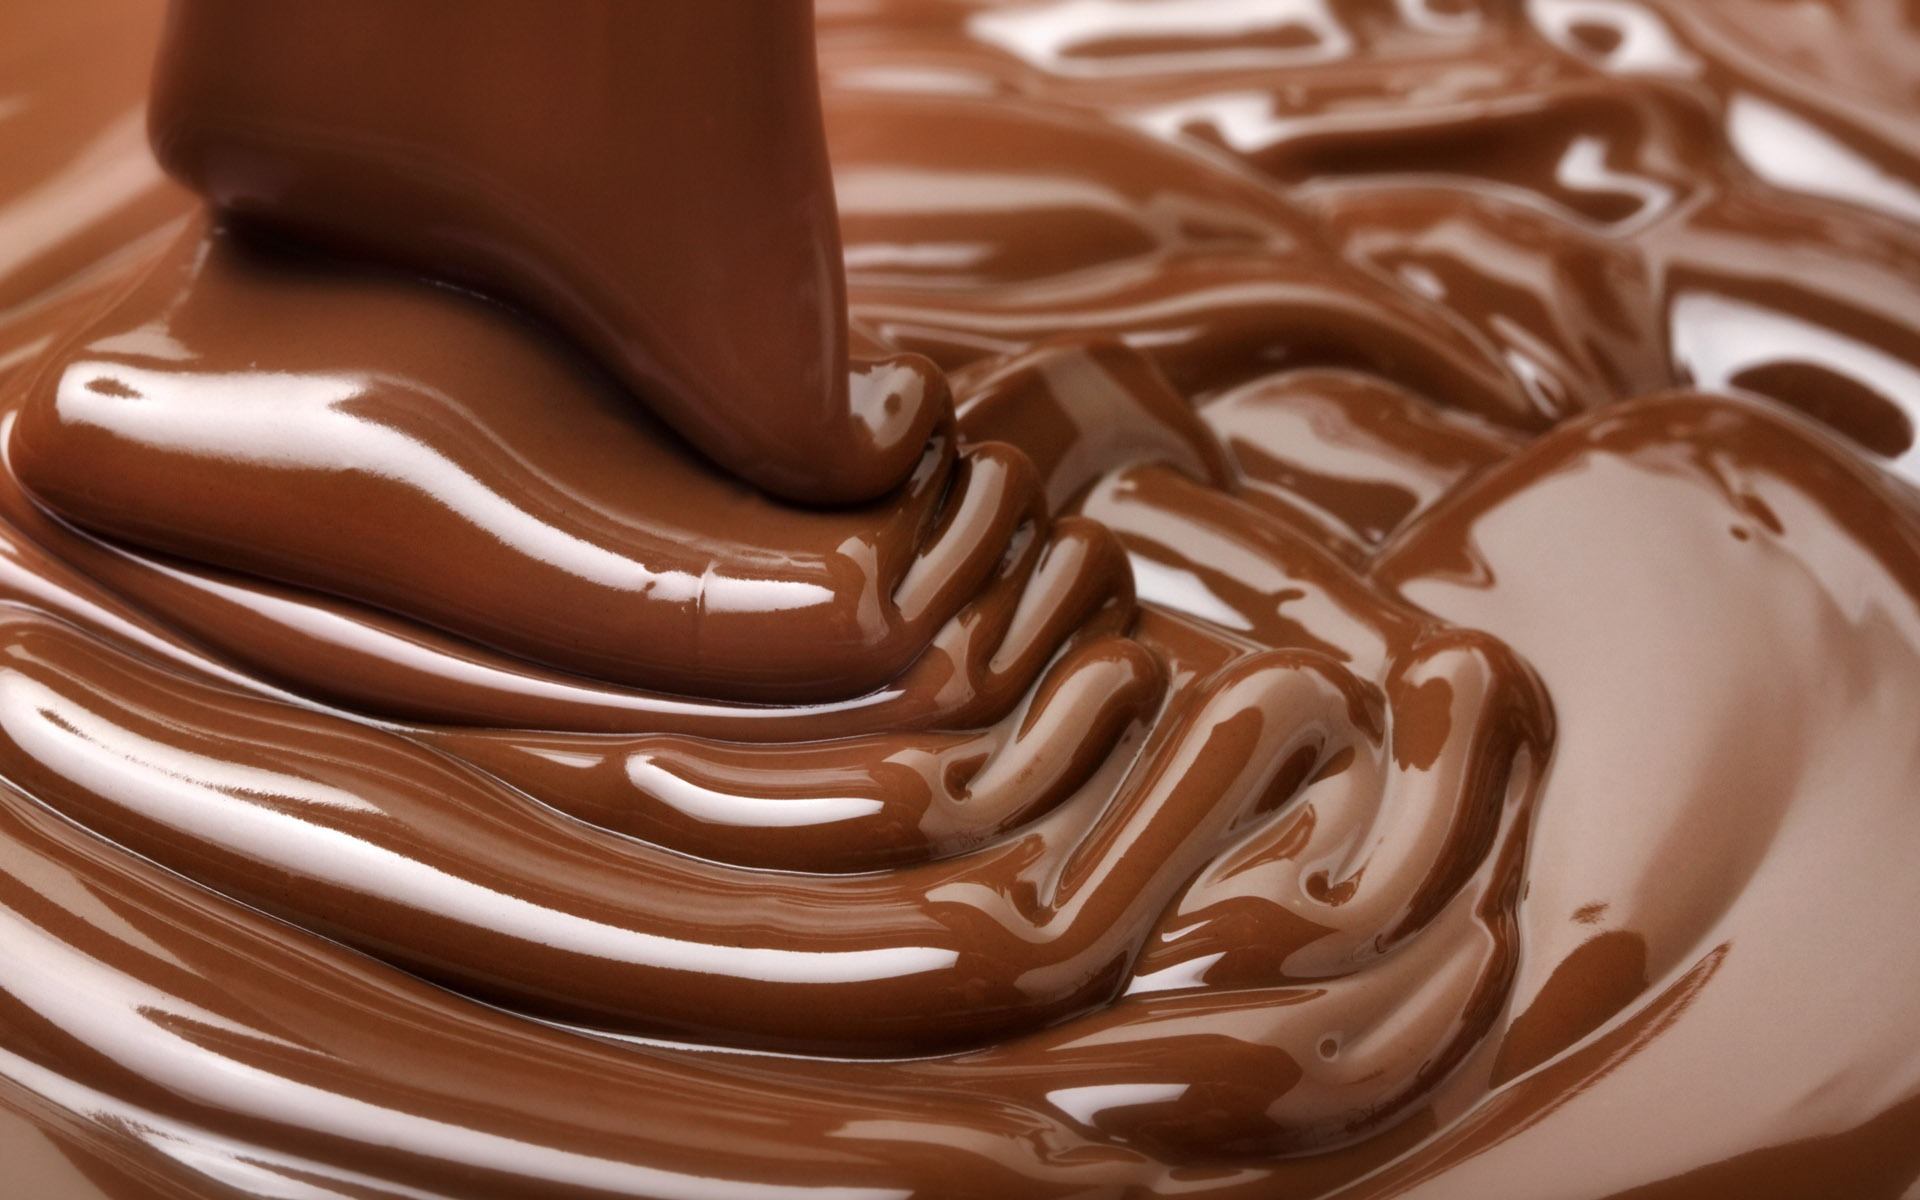 15 Easy and Mind-Blowingly Sweet Chocolate Recipes You’re Looking For